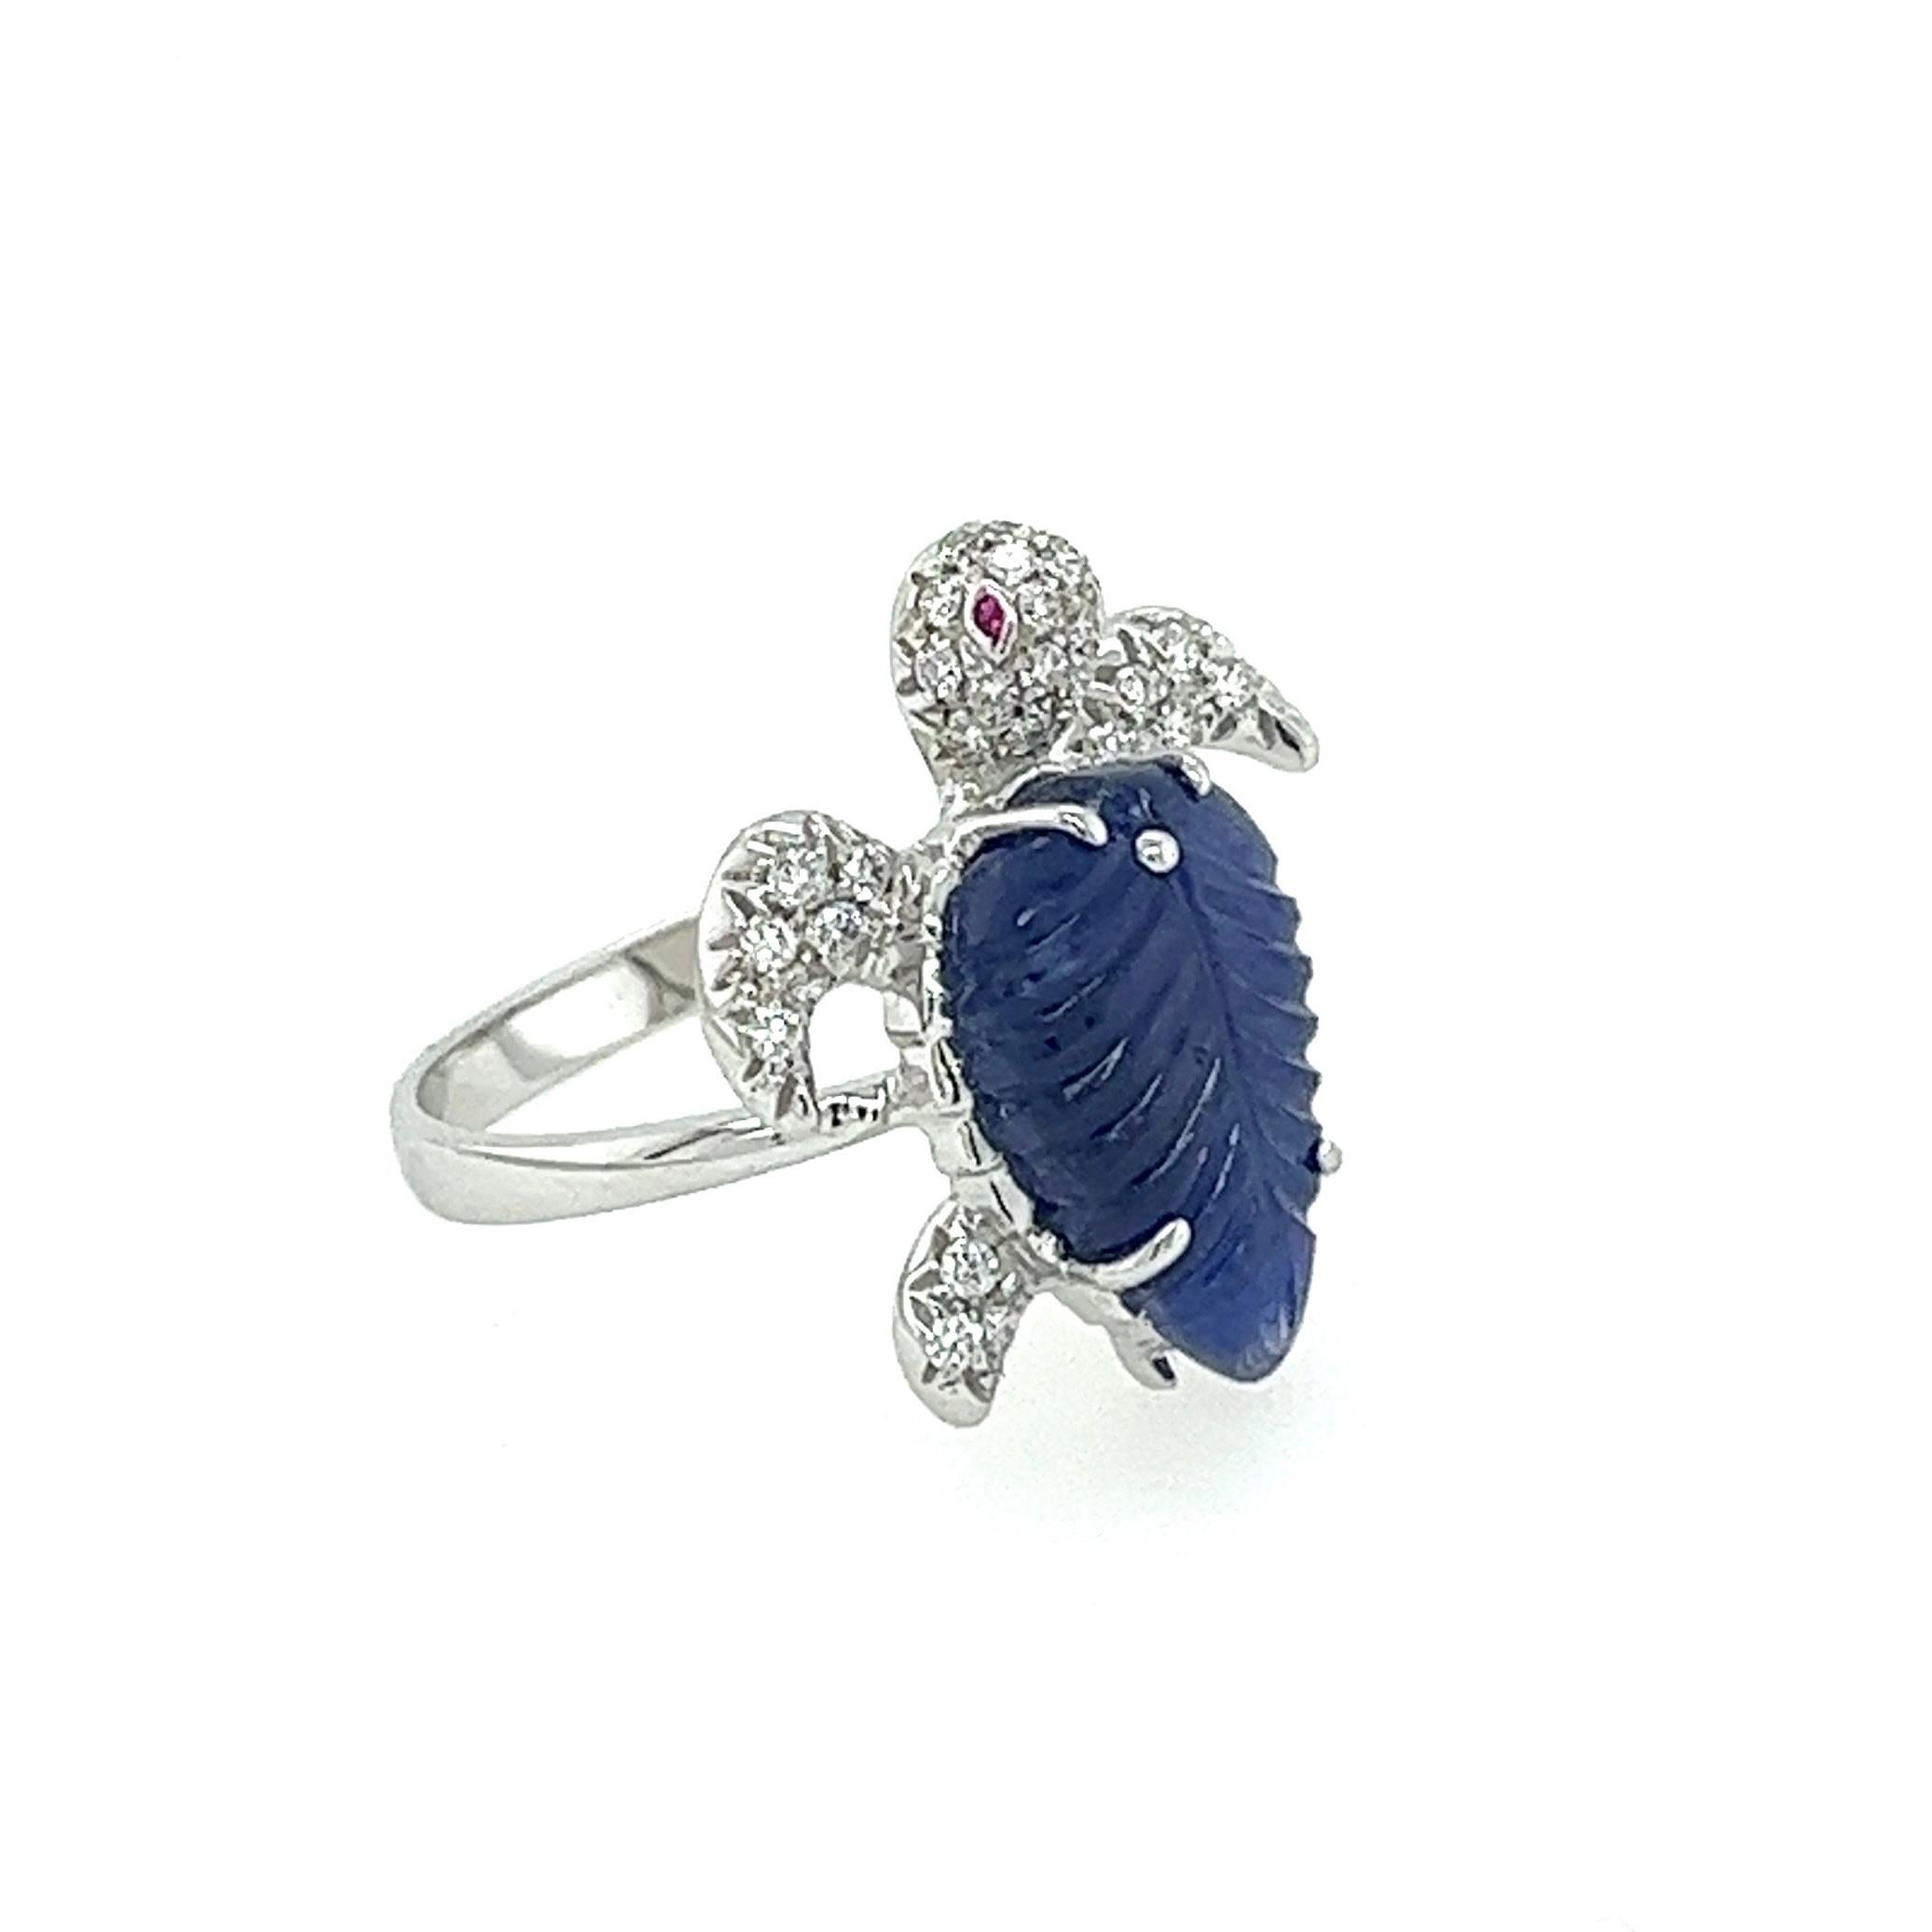 18K  White Gold Sapphire Turtle Ring with Rubies & Diamonds
1 Blue Sapphire - 4.60 CT
36 Diamonds - 0.31 CT
2 Rubies - 0.01 CT
18K White Gold 4.10 GM

Turtle represents intuitive development, protection, wisdom, patience, and determination. As a